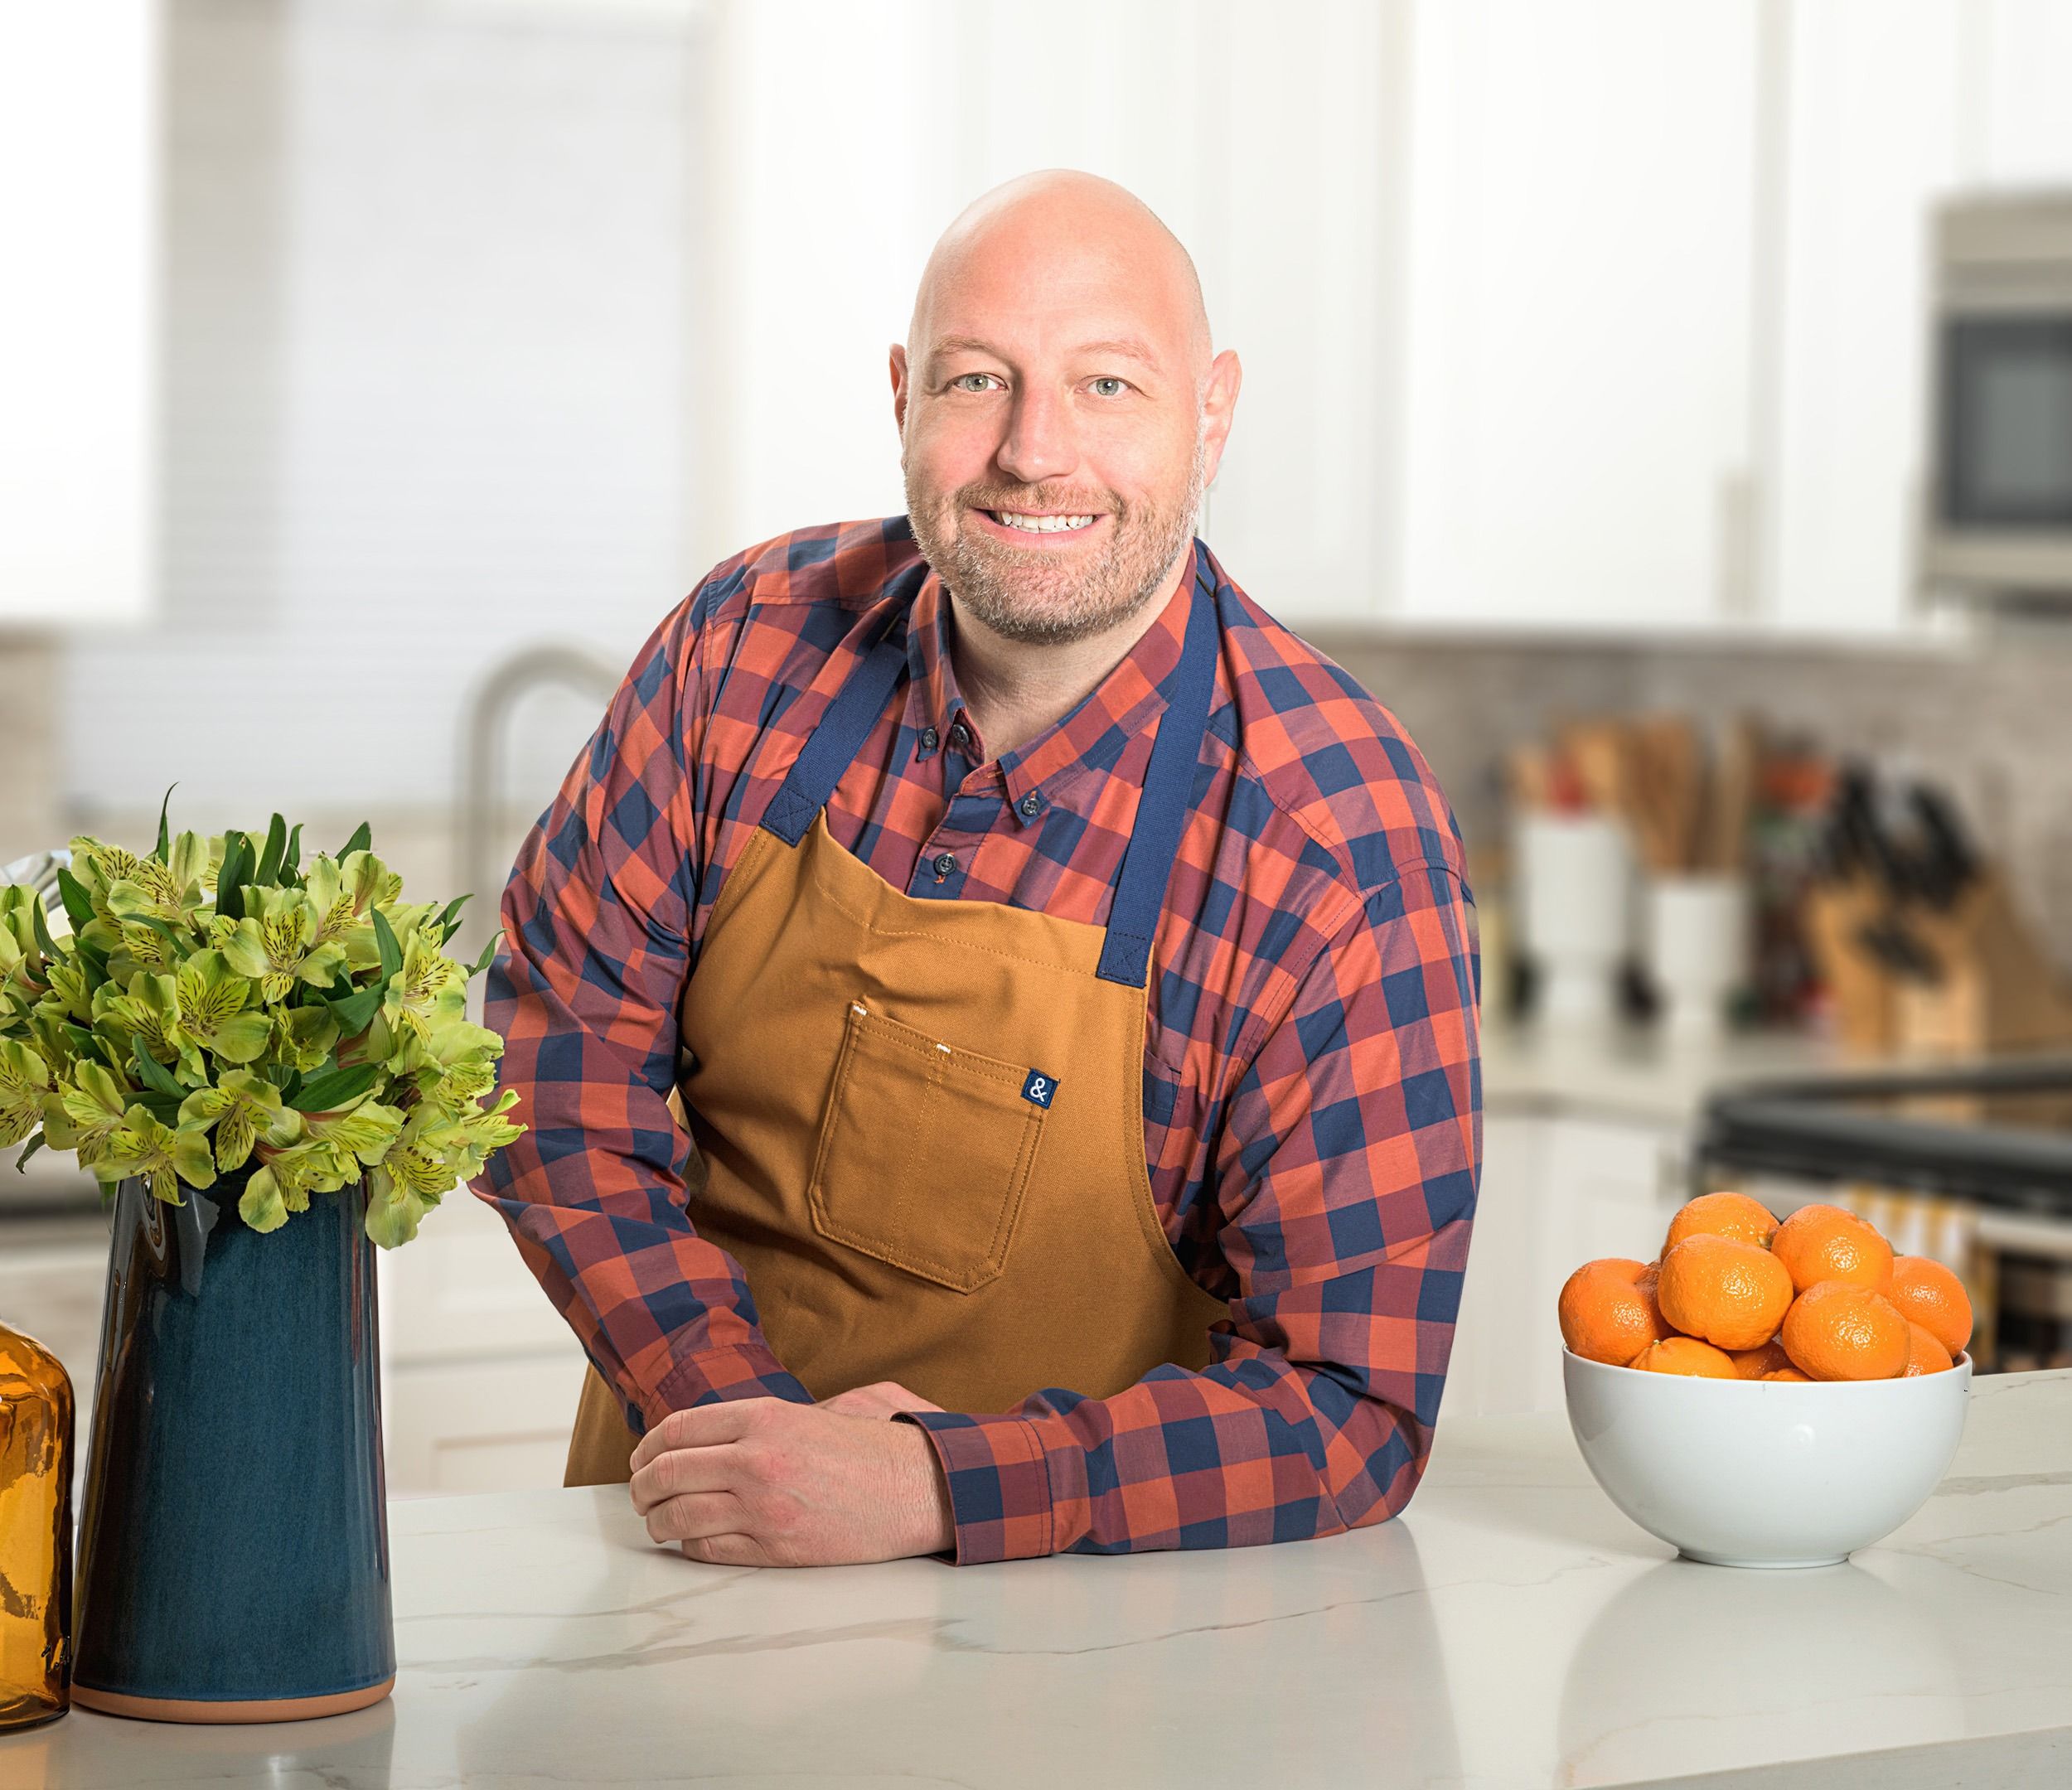 Reed Dunn of Pesto and Potatoes, wearing a red and blue flannel underneath a brown apron, leaning on a kitchen counter and smiling at the camera.